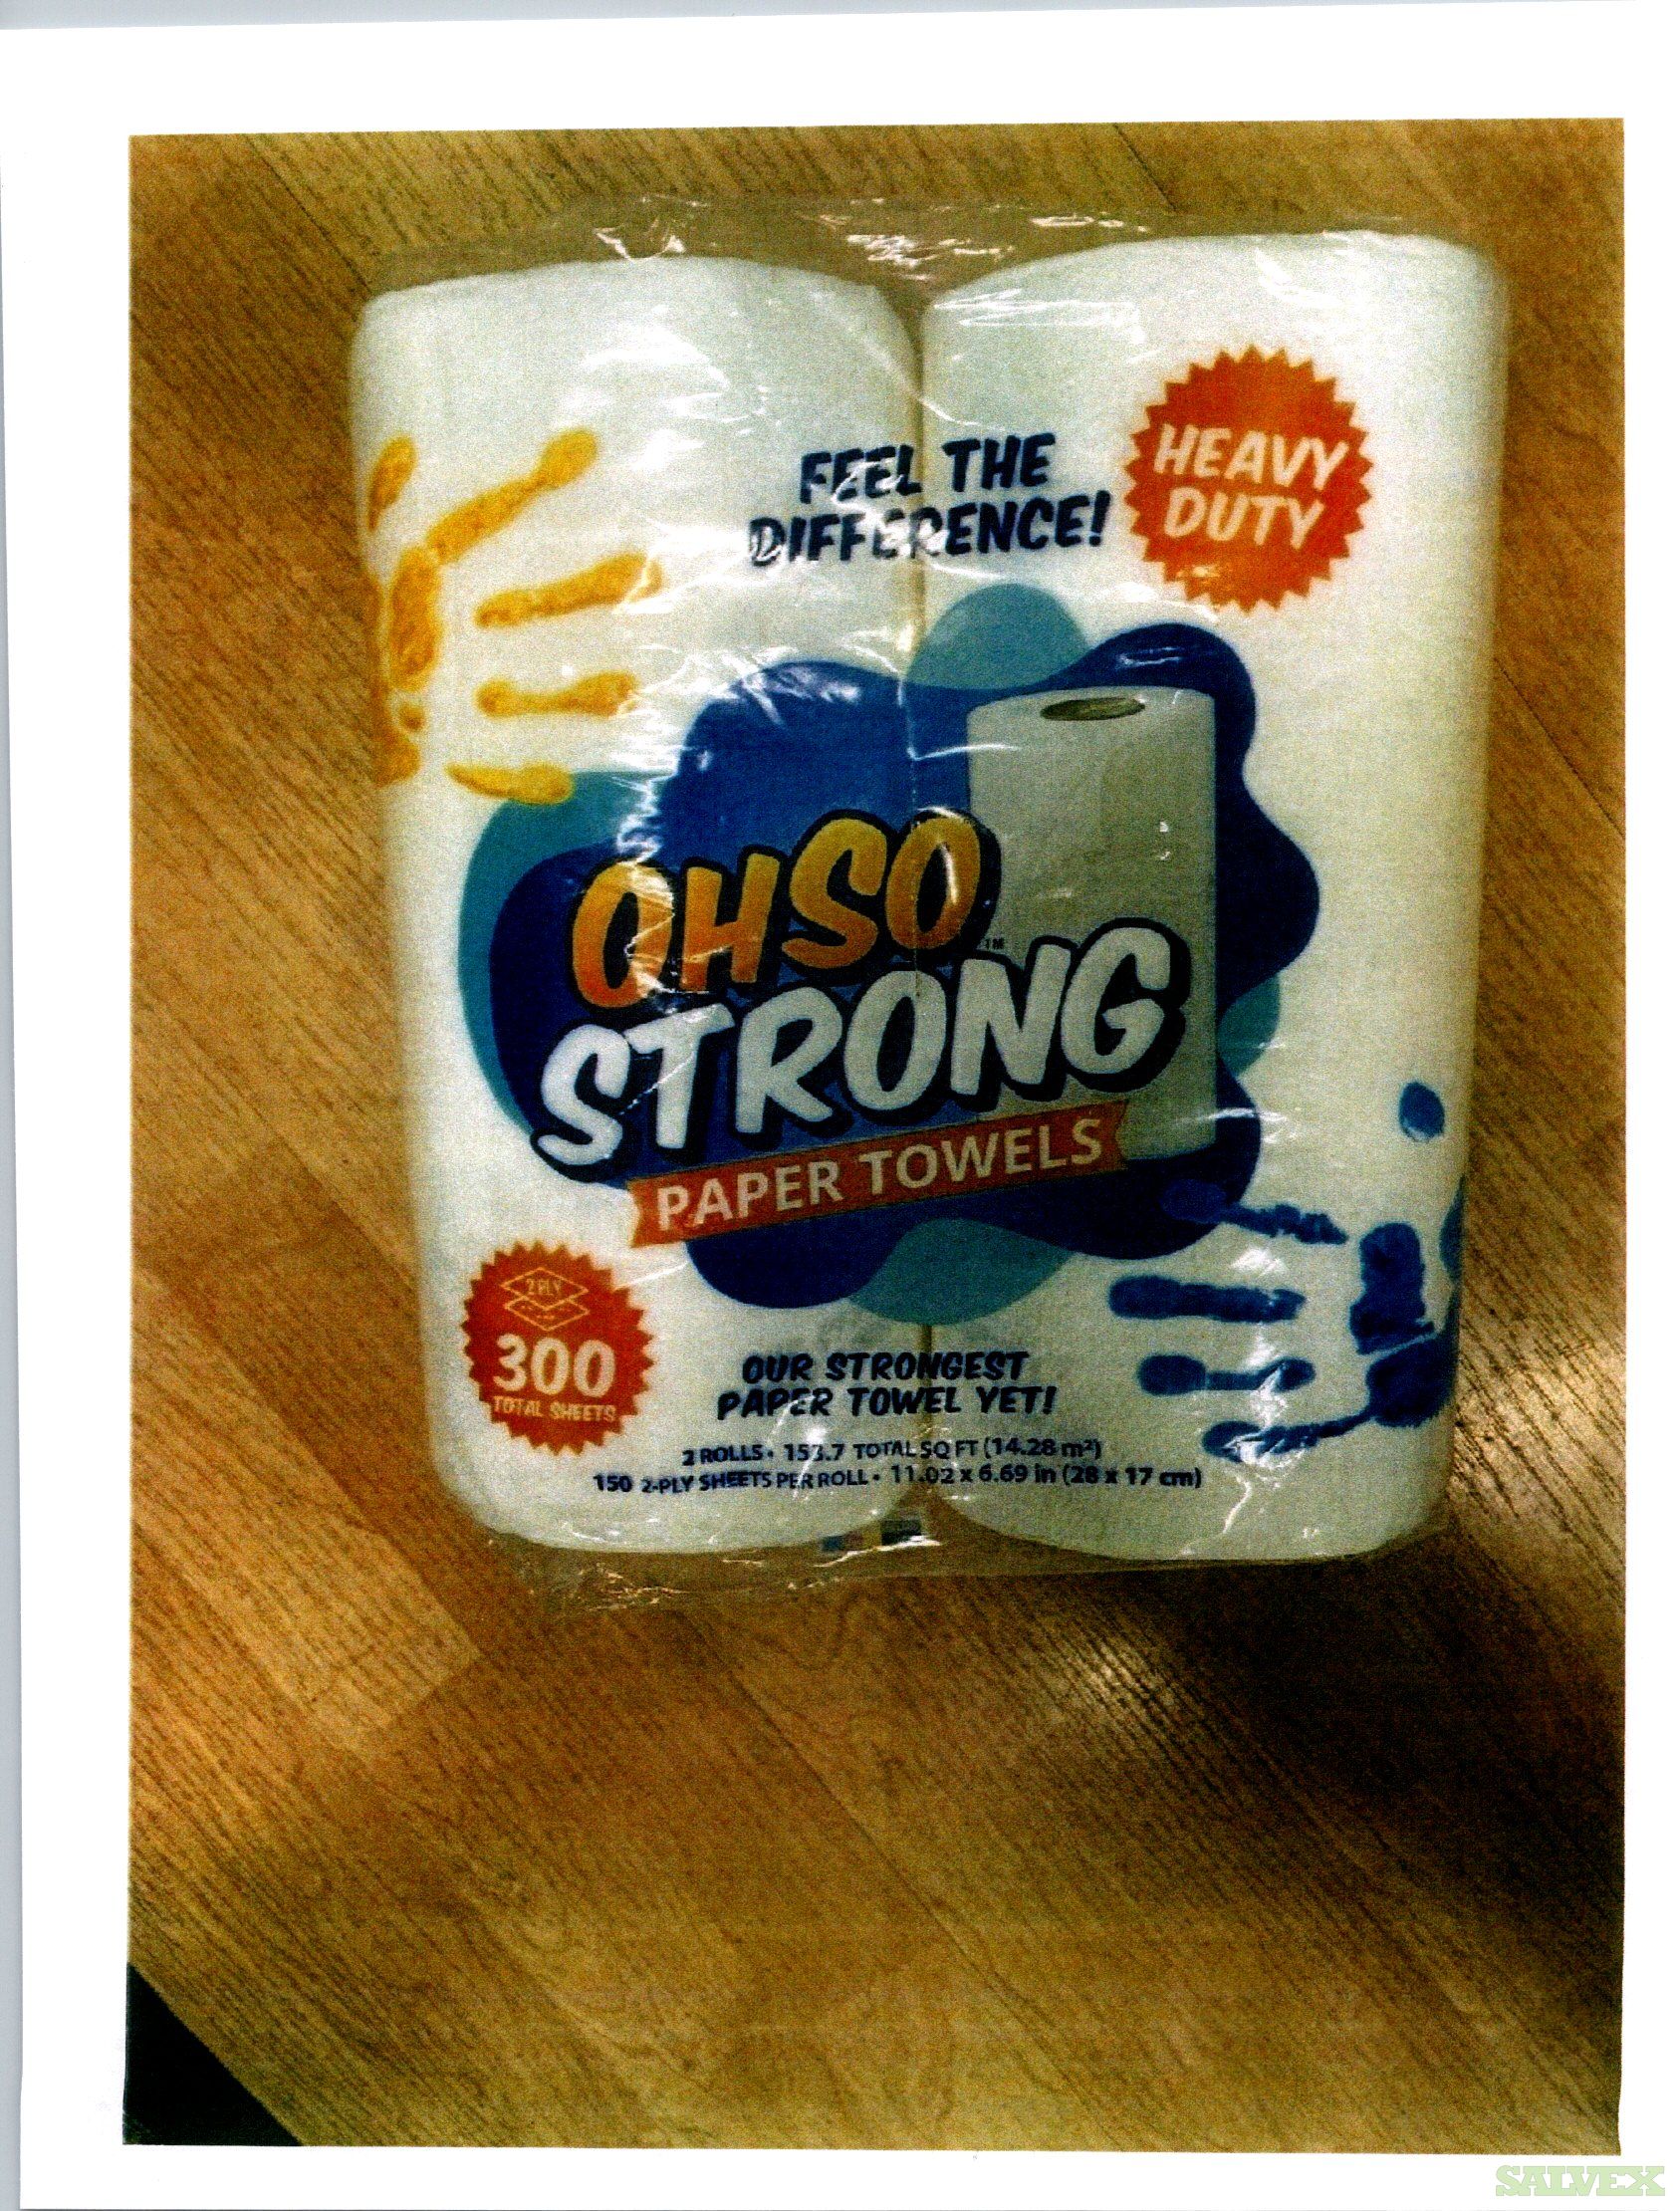 Paper Towels - Oh So Strong (180 cases)